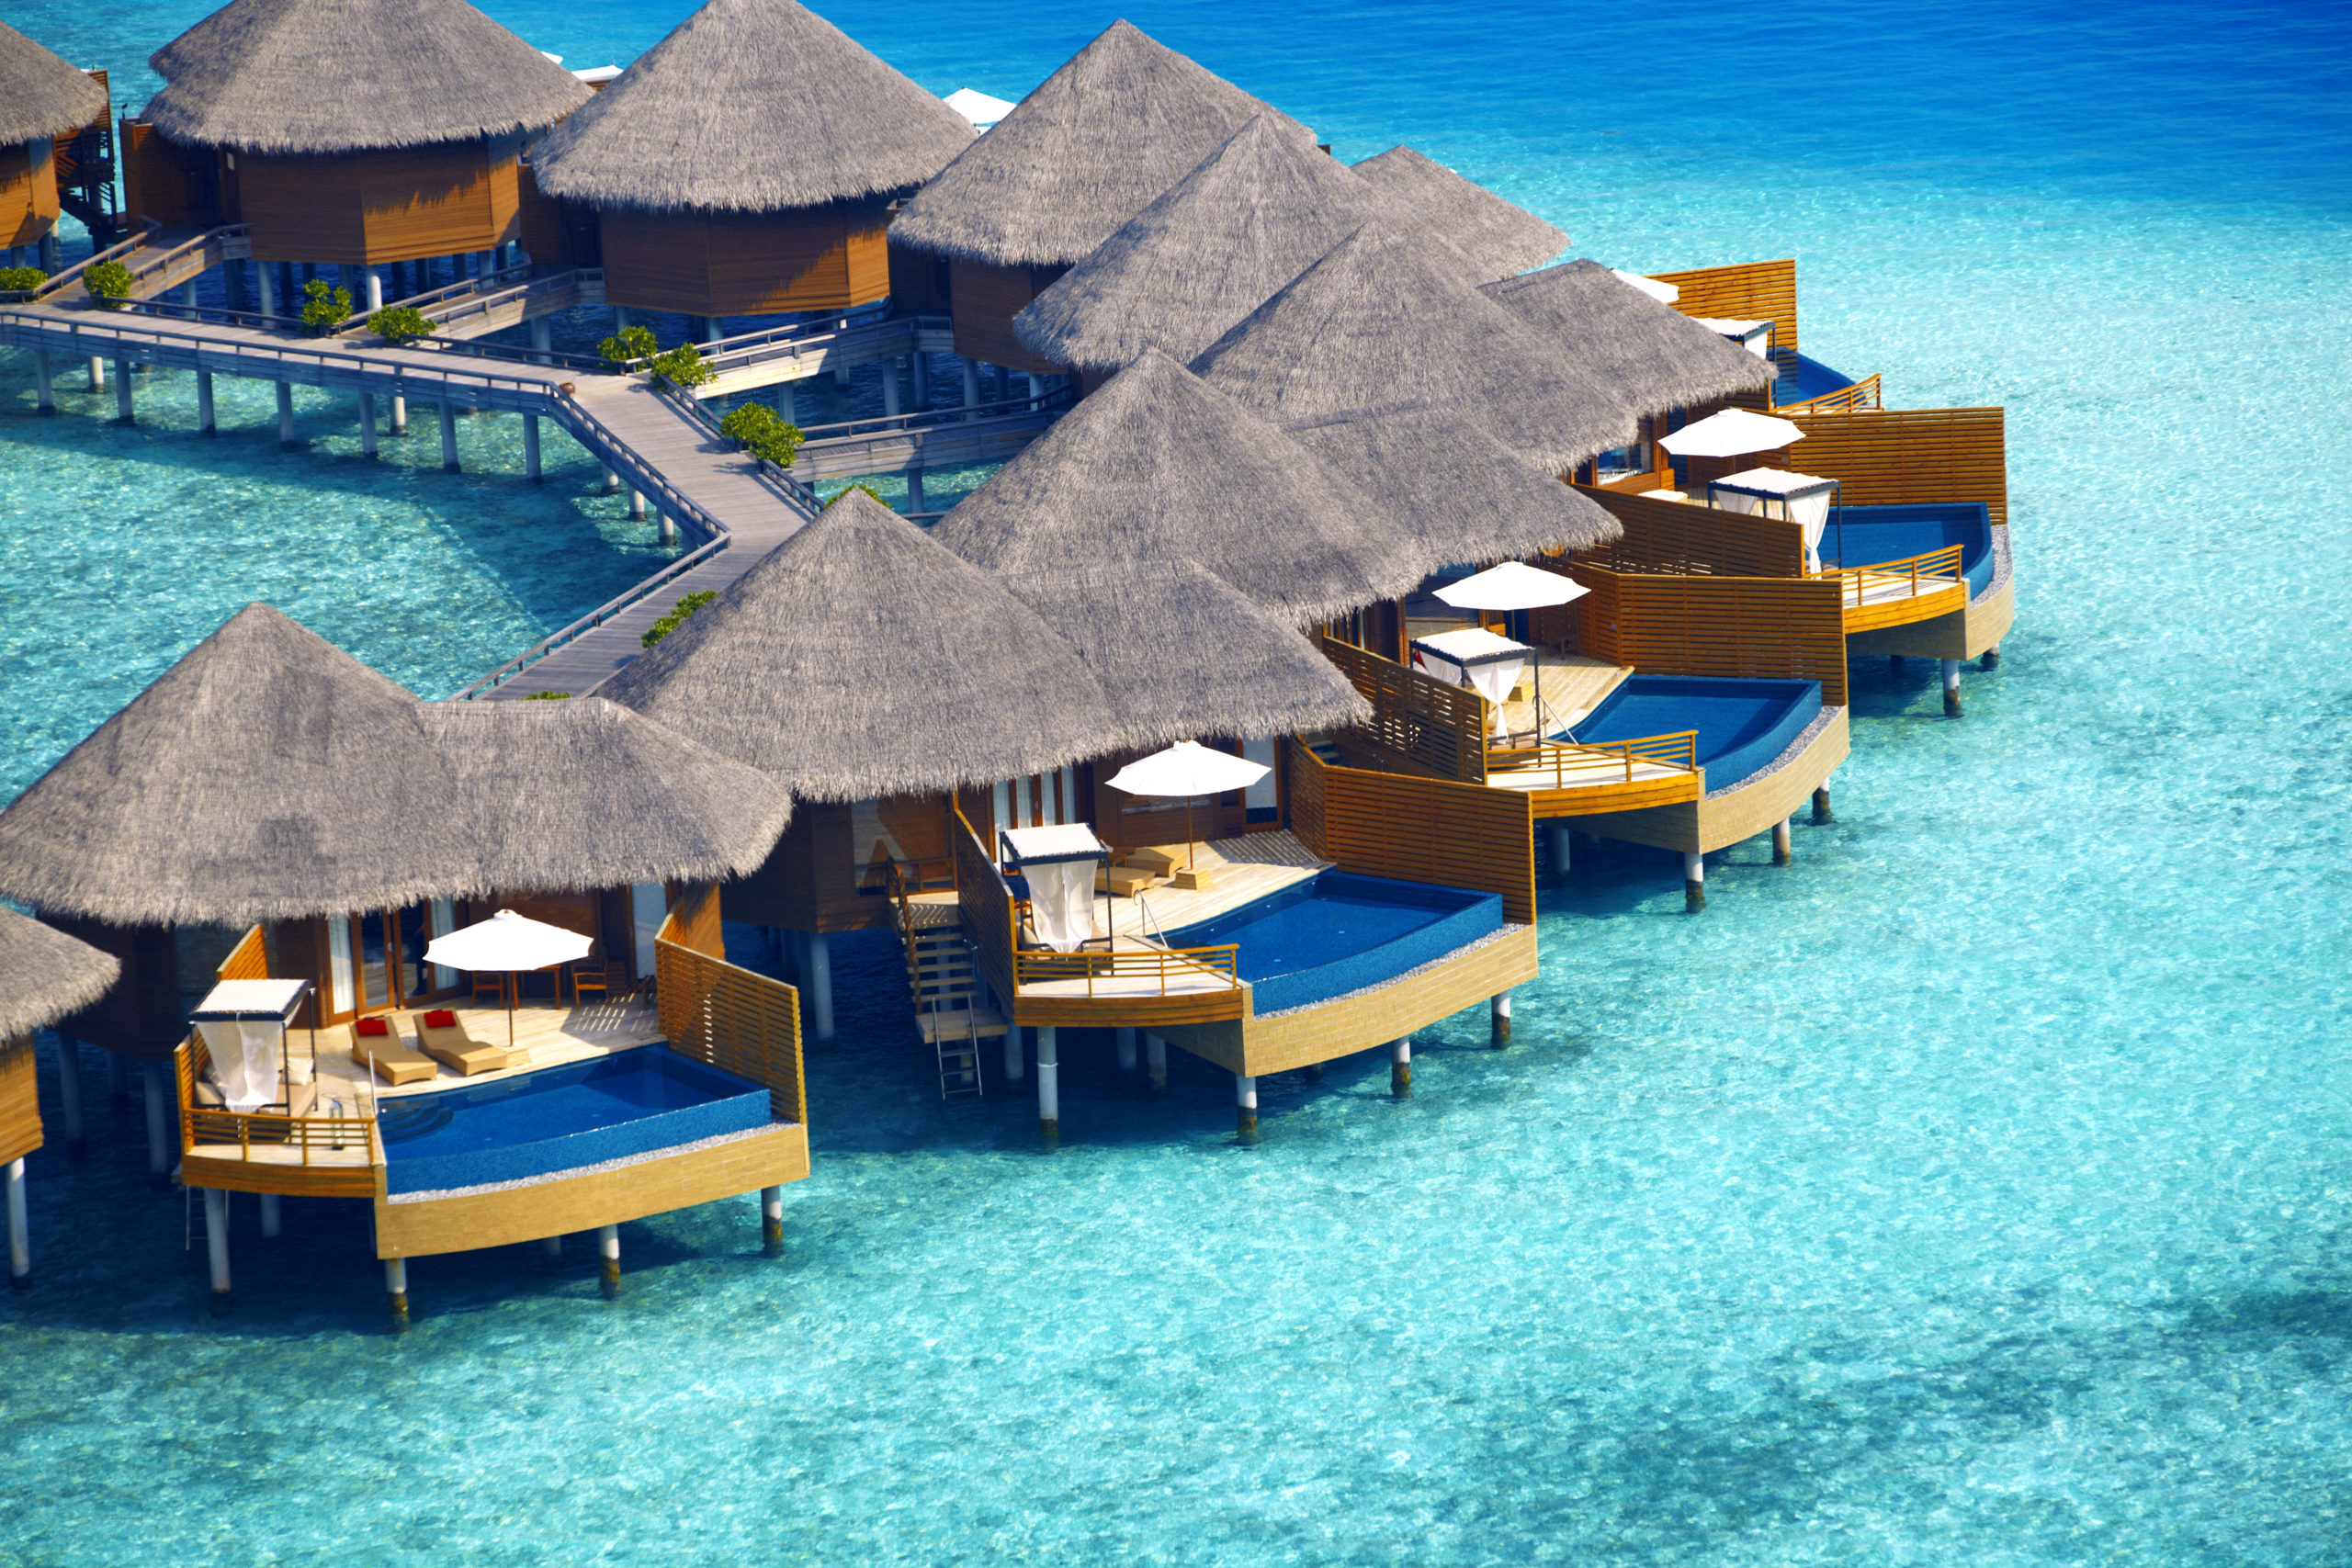 Baros Maldives offers 45 beachside residences and 30 water villas.